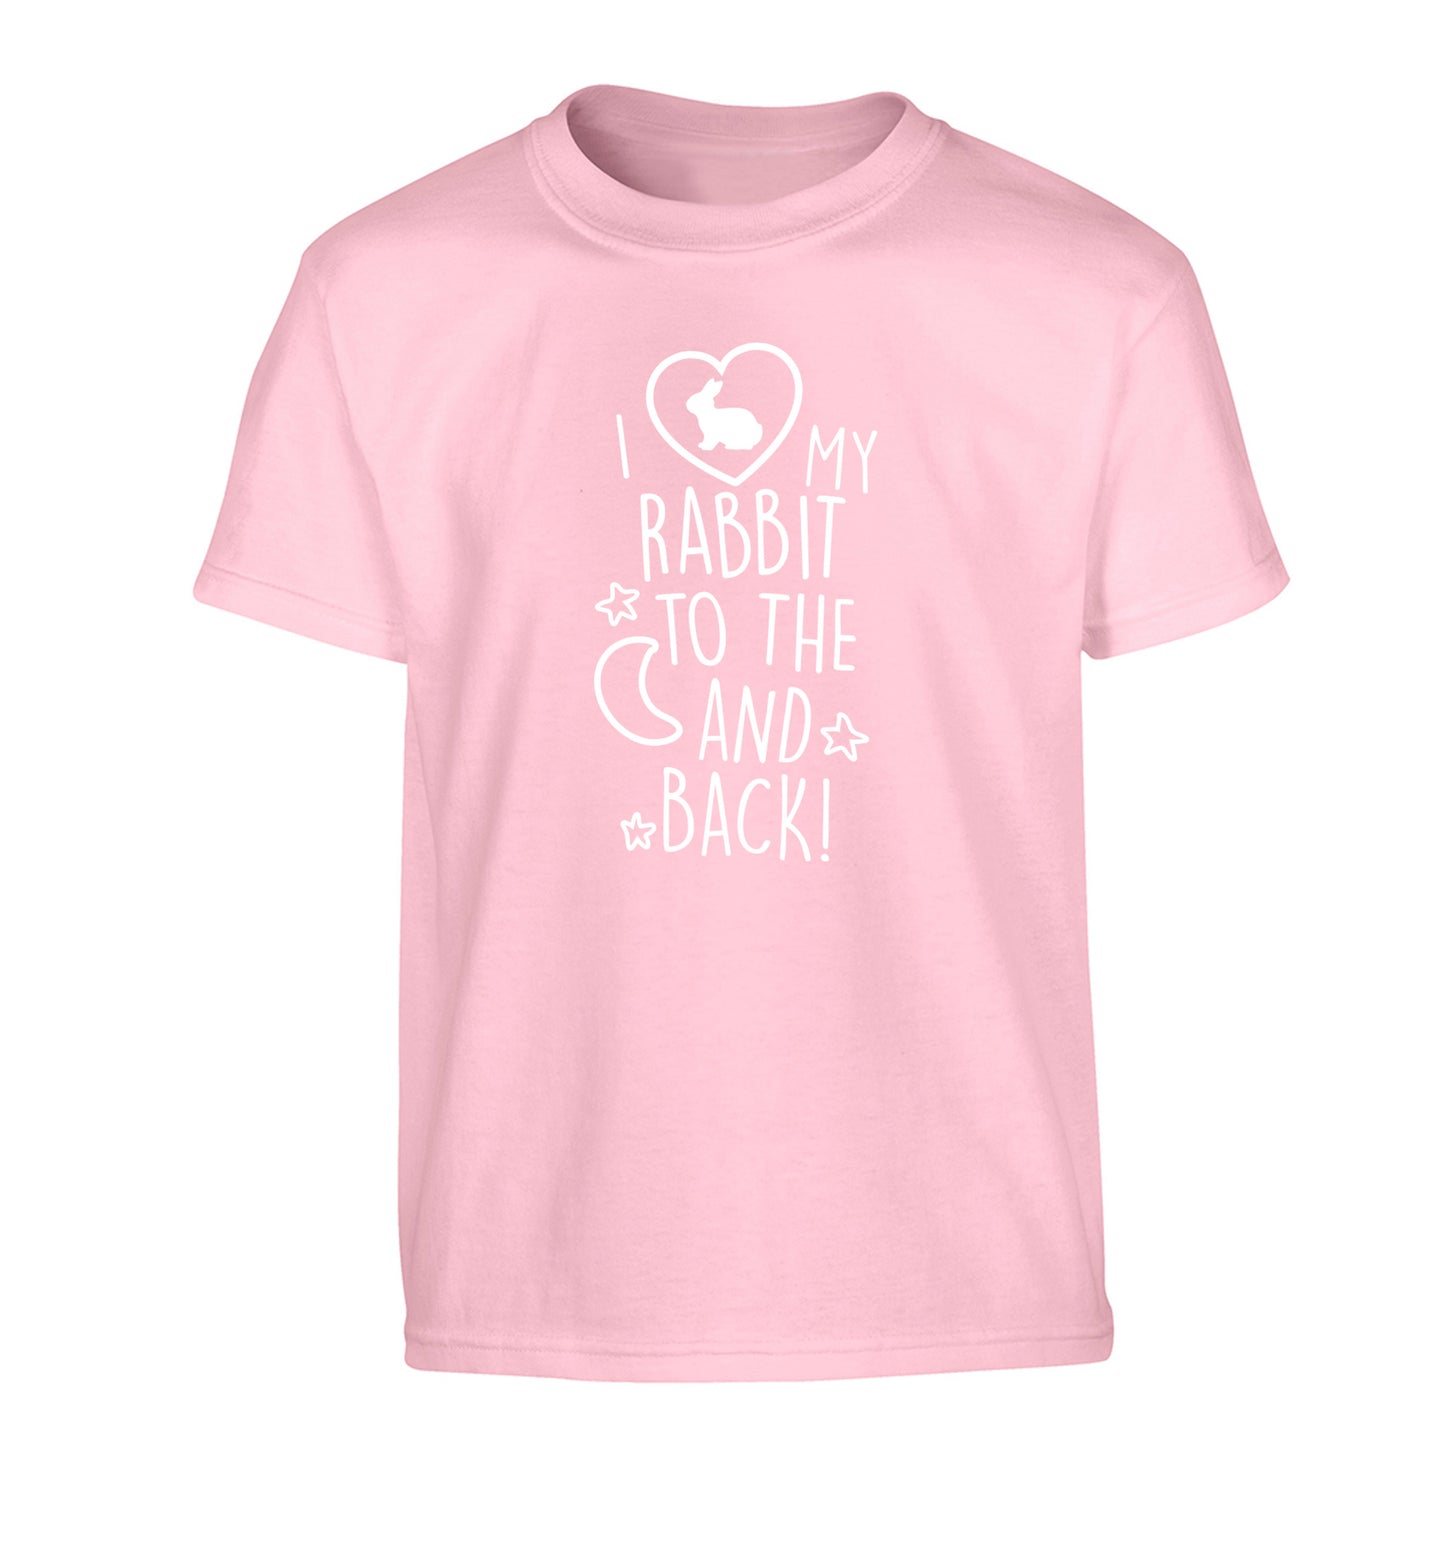 I love my rabbit to the moon and back Children's light pink Tshirt 12-14 Years